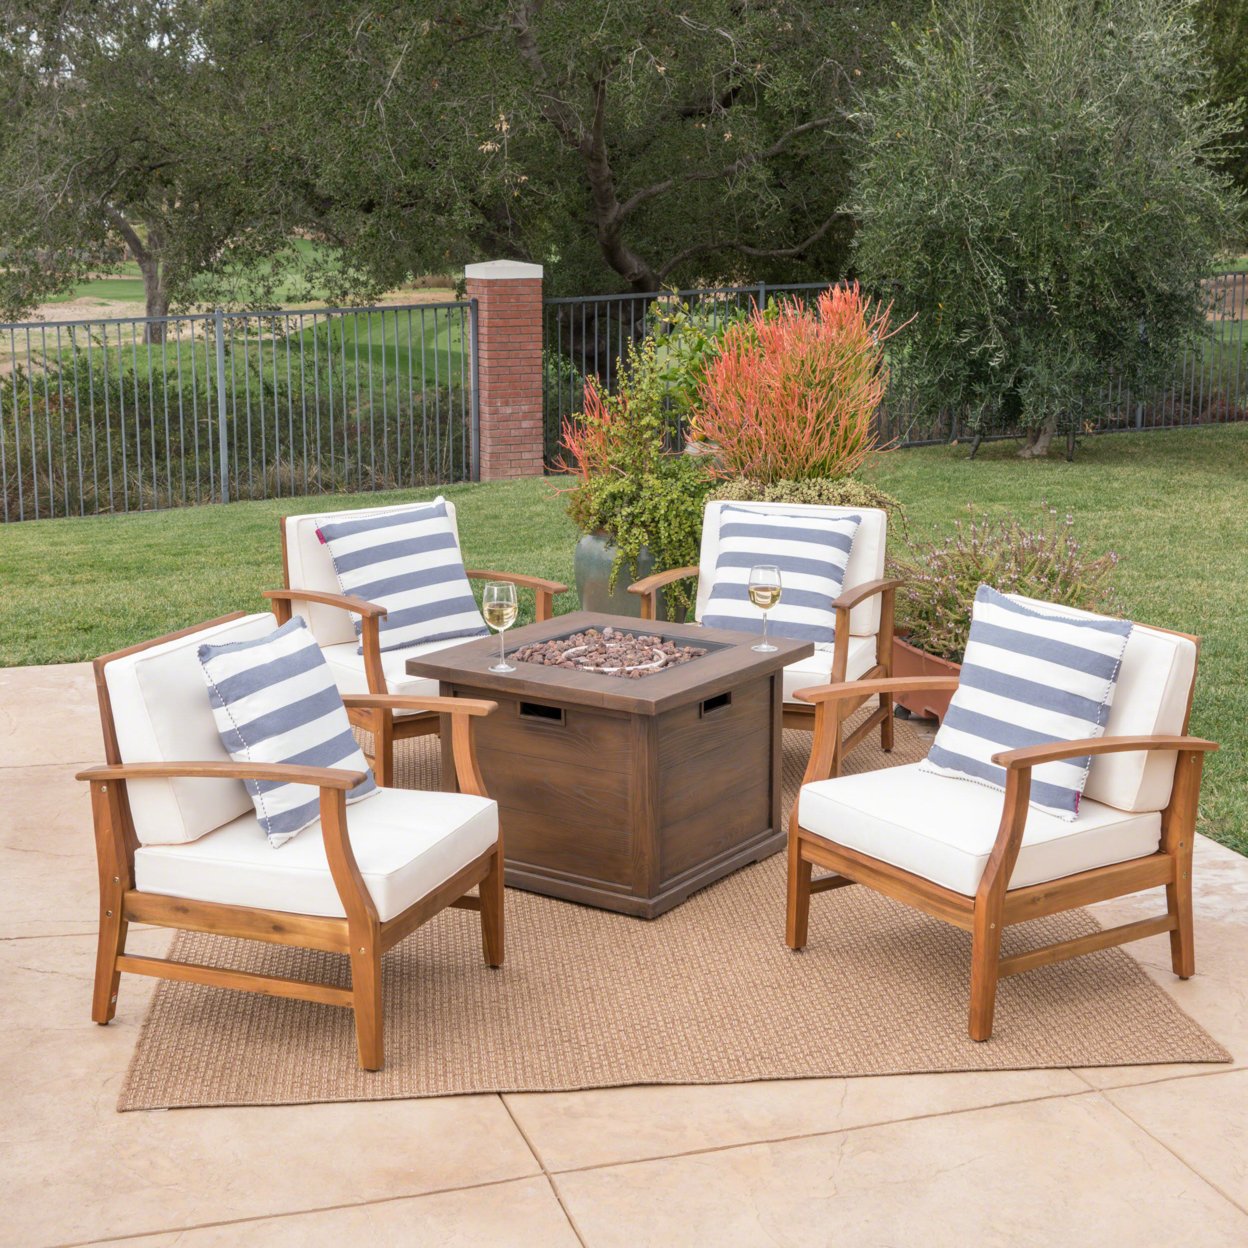 Lilith Outdoor 4 Seat Teak Finished Acacia Wood Club Chairs Fire Pit Chat Set - Gray + Dark Gray